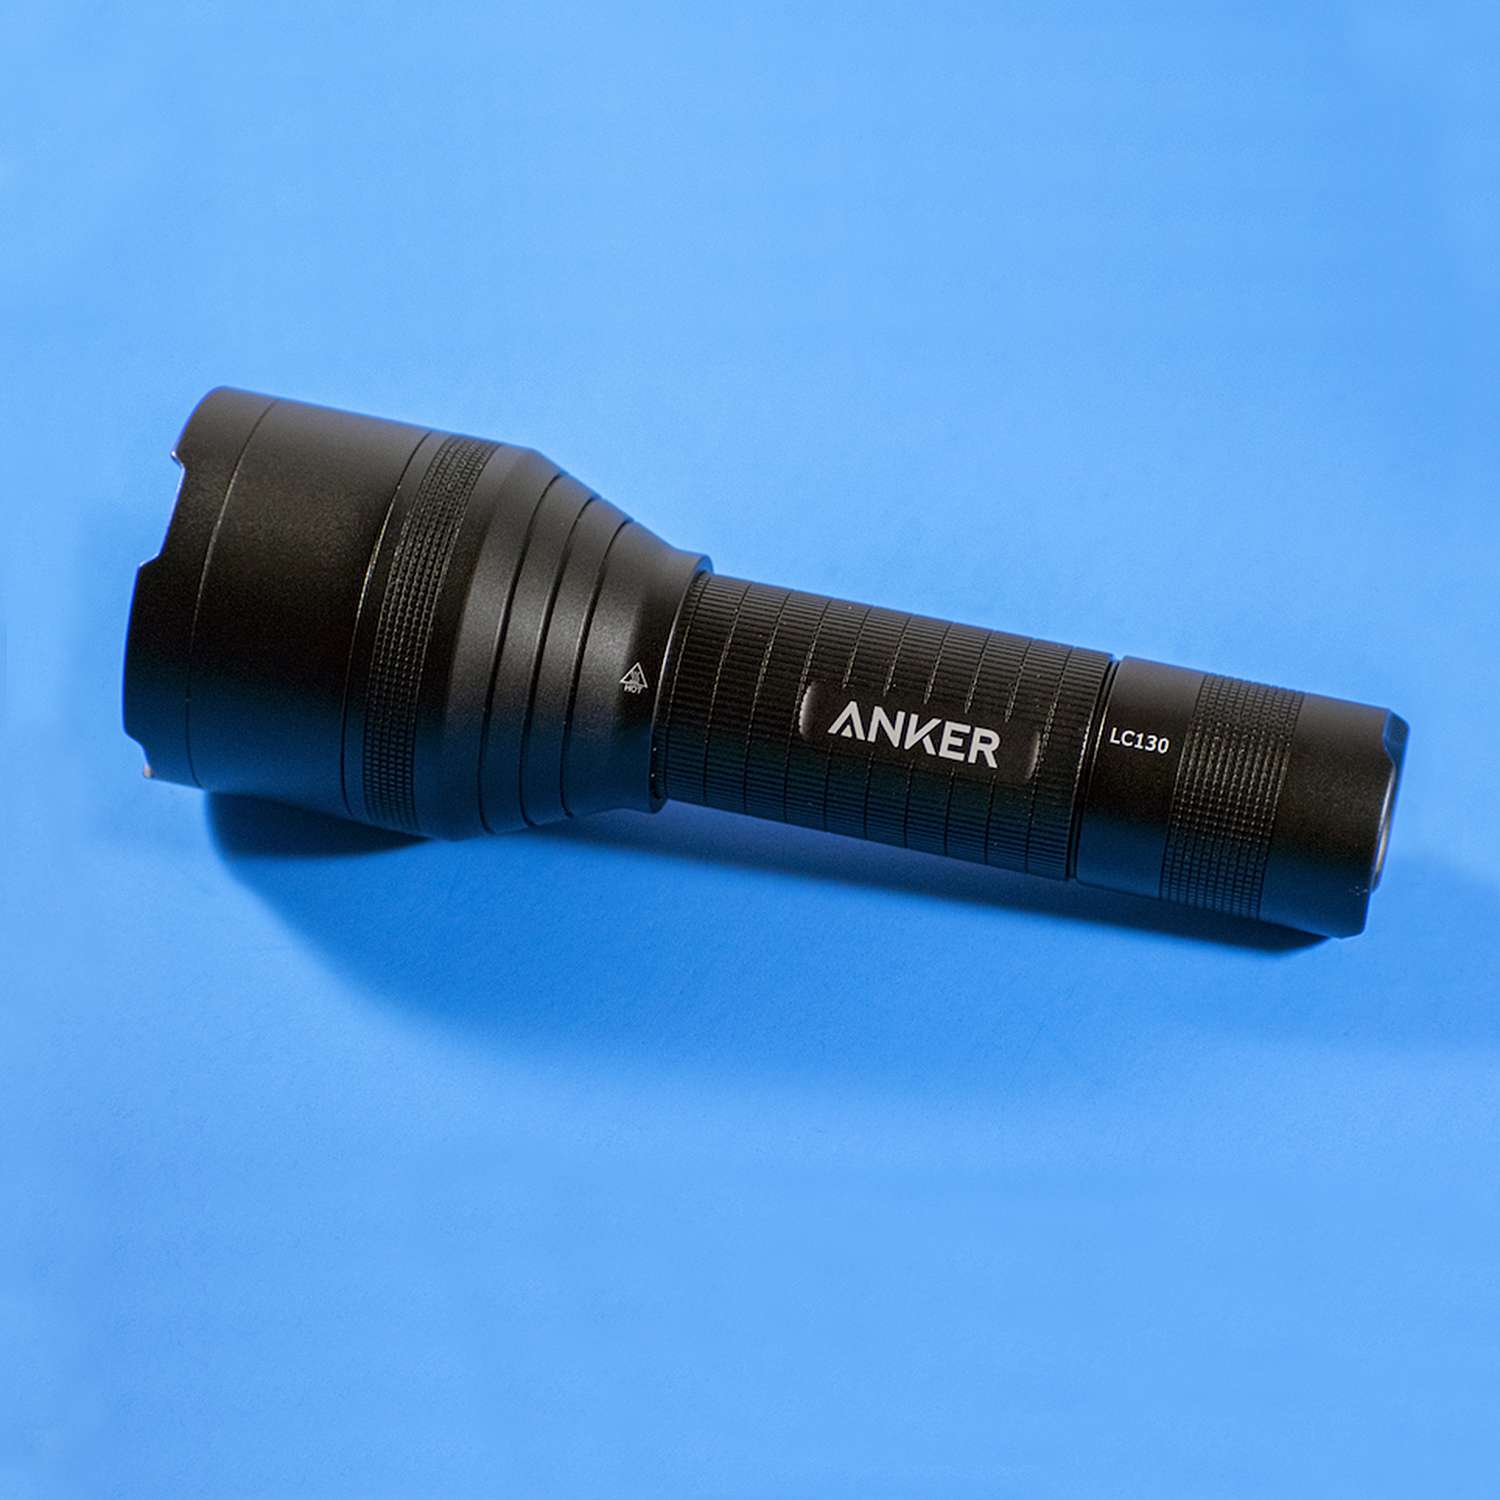 Anker Super Bright Tactical Flashlight Review: Durable Outdoors Lighting